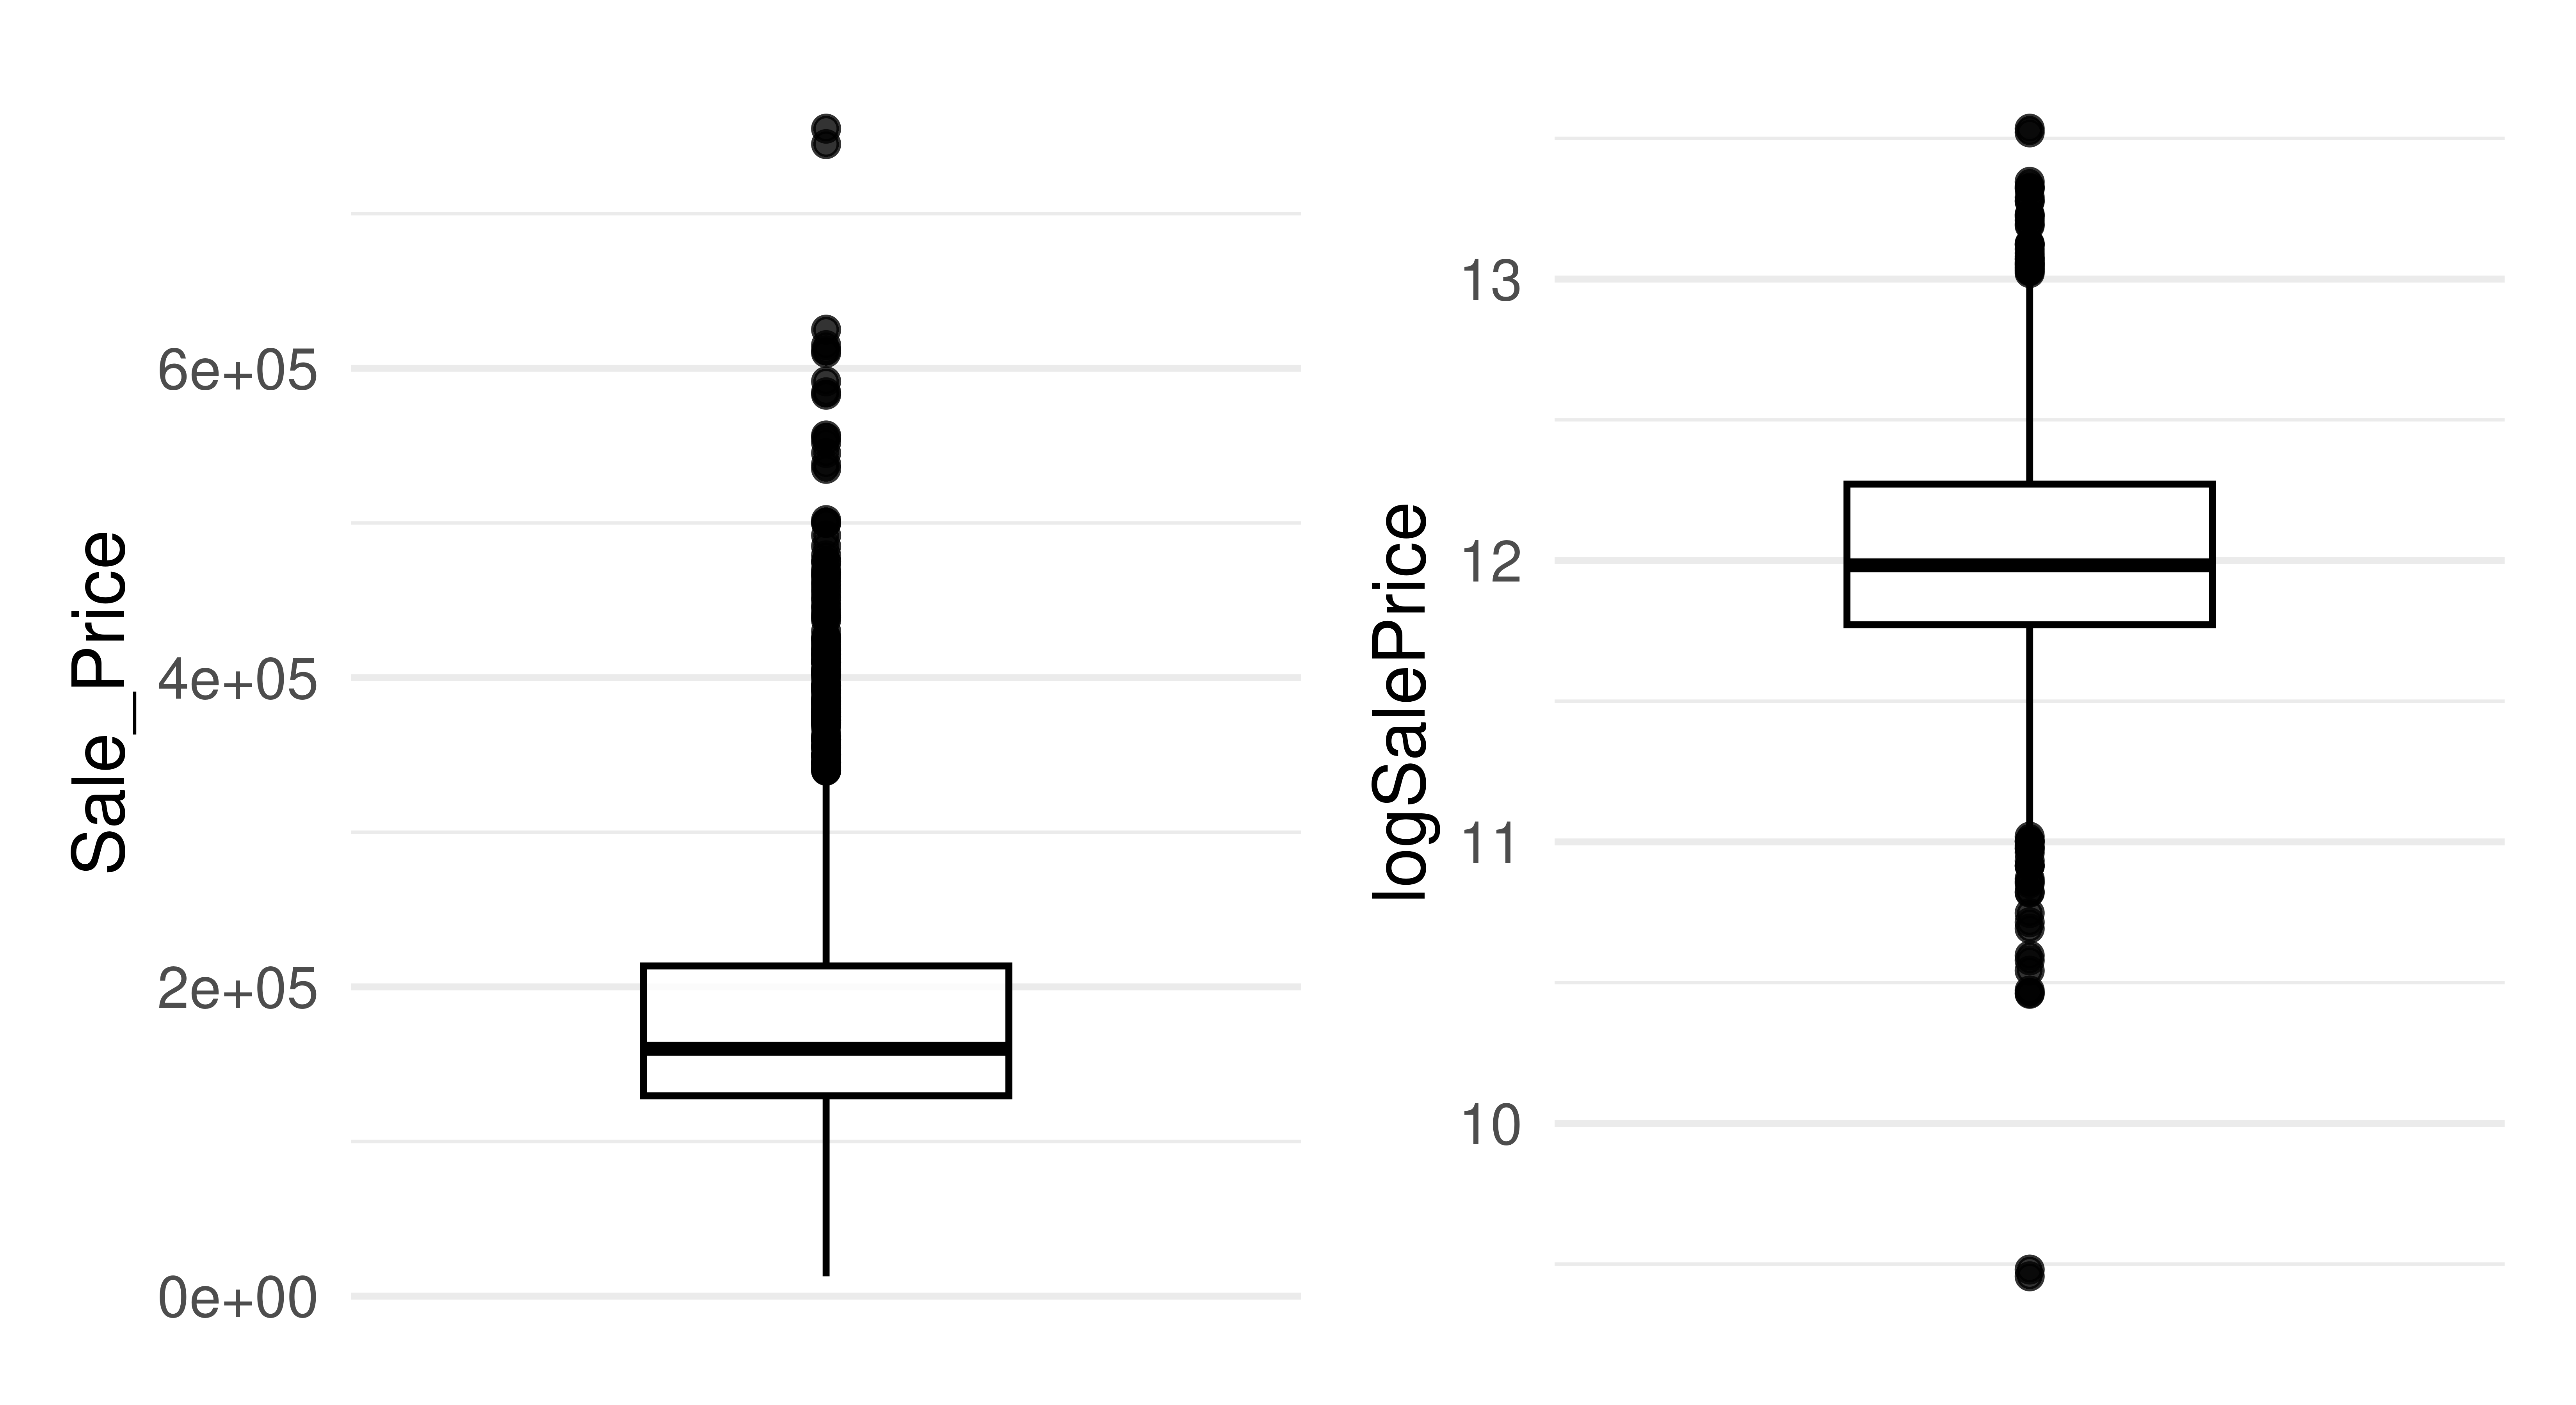 Two boxplots. Left plot shows house prices up to $600,000, the majority of prices are between roughly $100,000-$200,000. Right plot shows log house prices primarily around 12 with an even range between 11 and 13 and a few outliers on both sides.